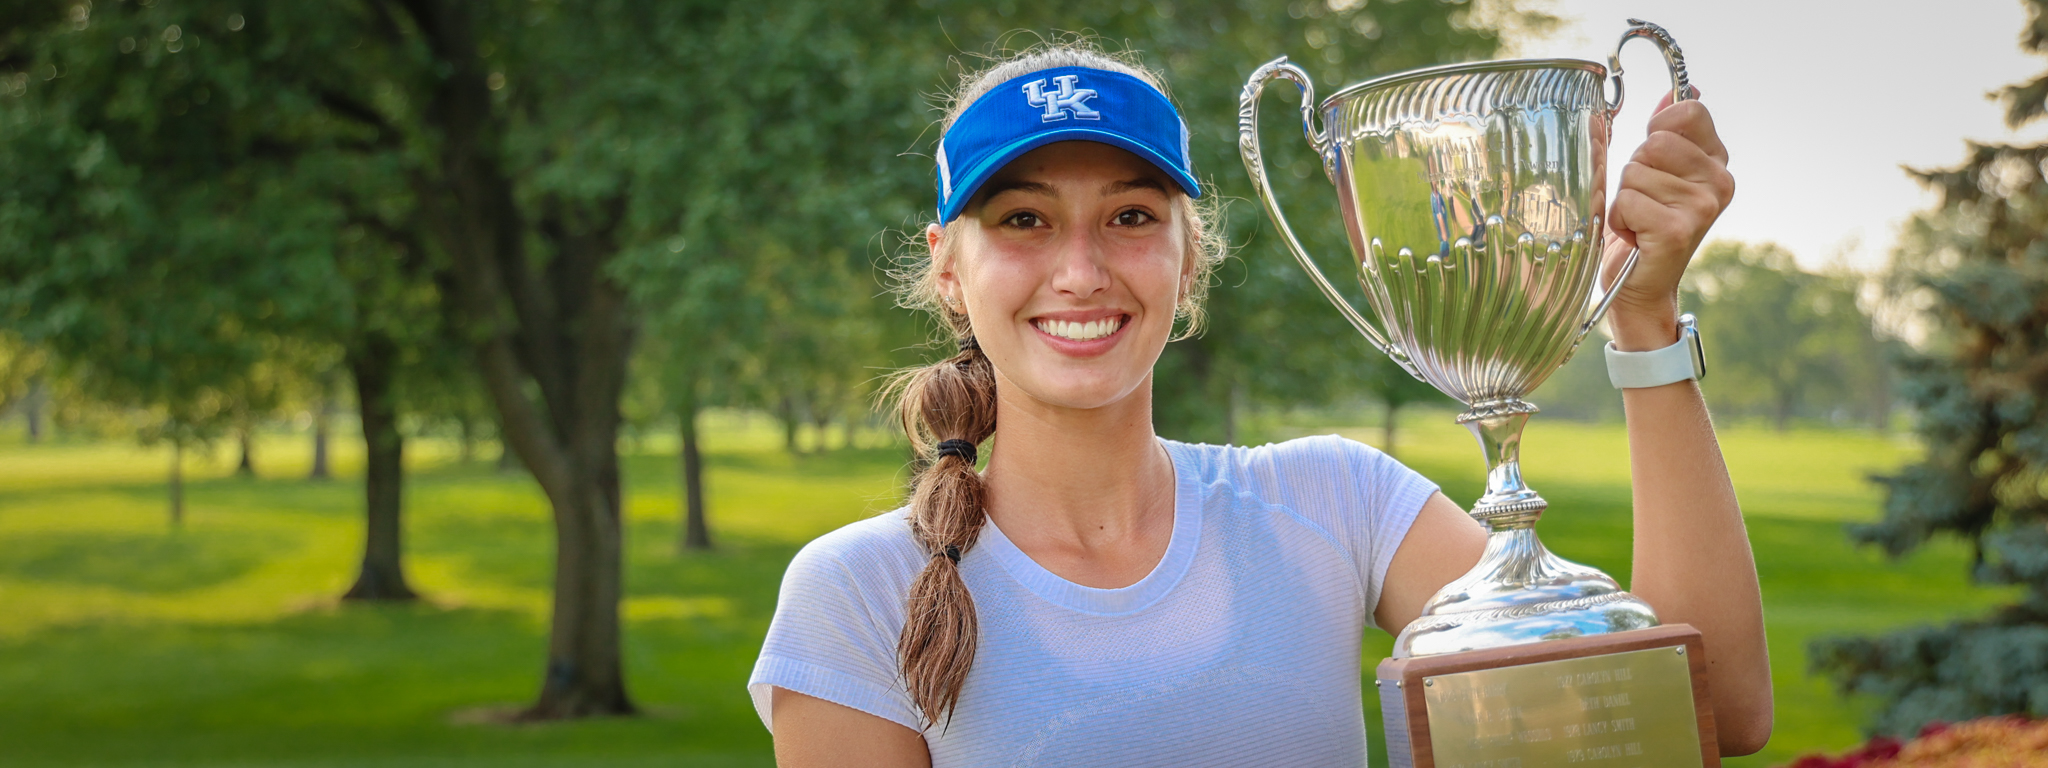 Wenzler claims medalist honors